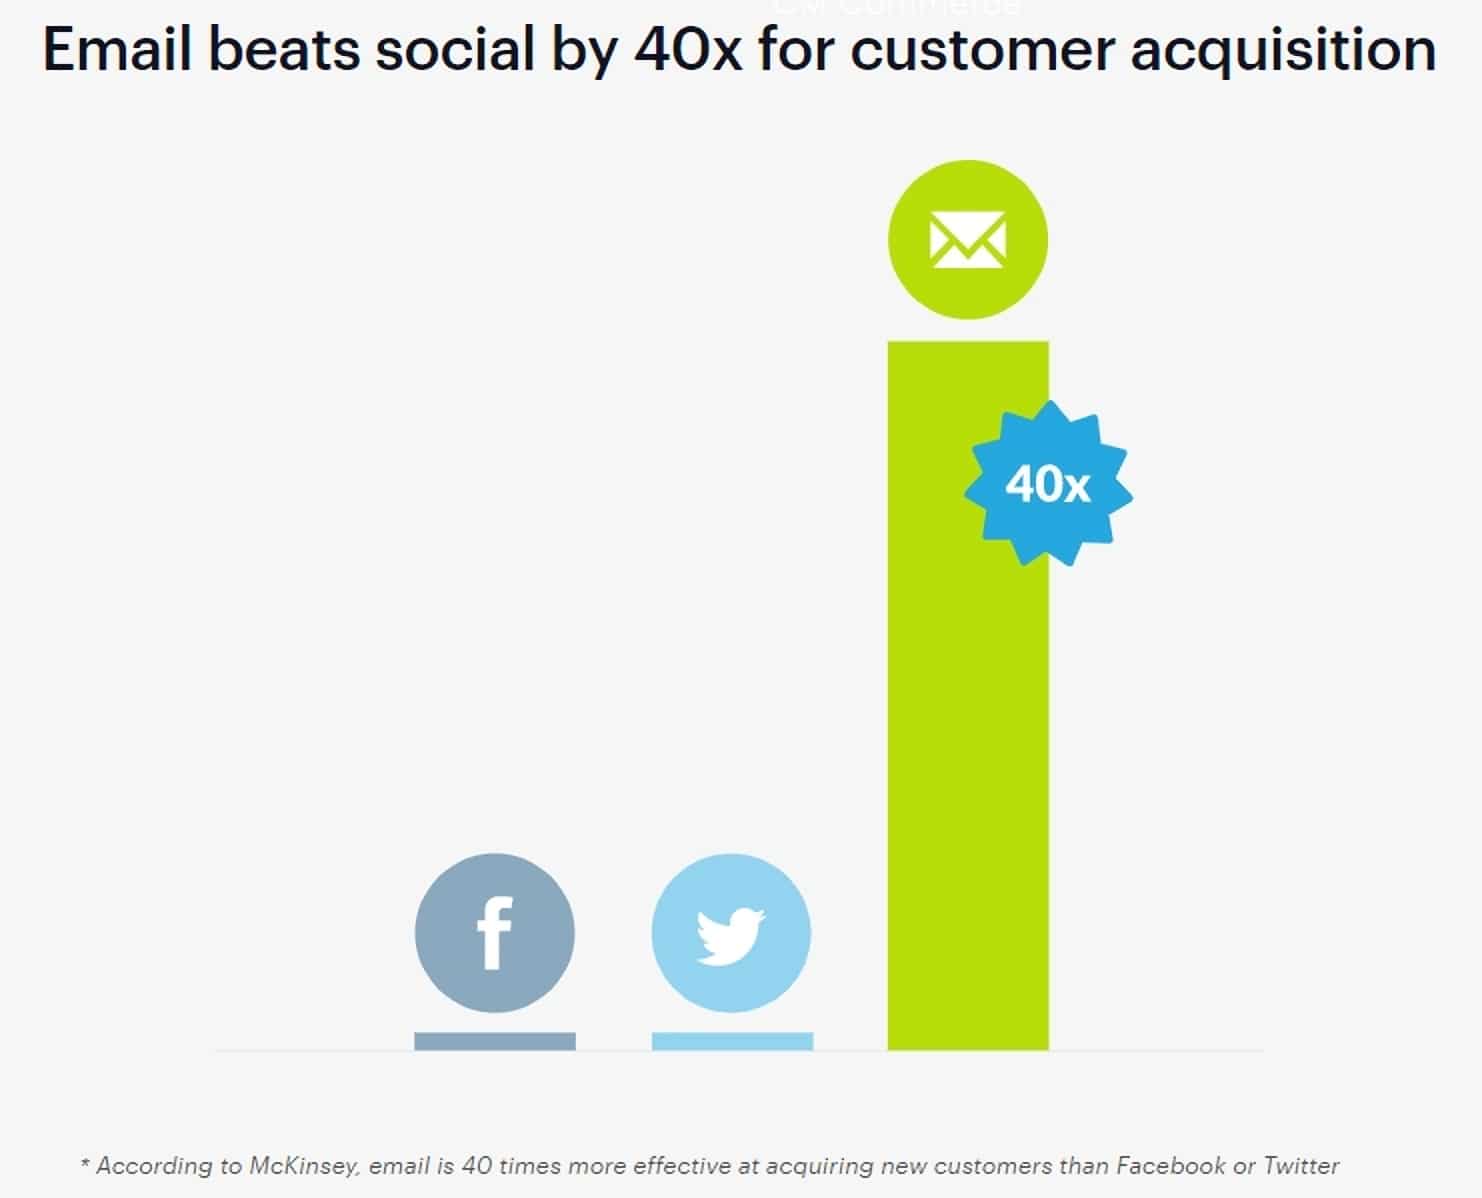 Email marketing is 40x more effective than social media marketing